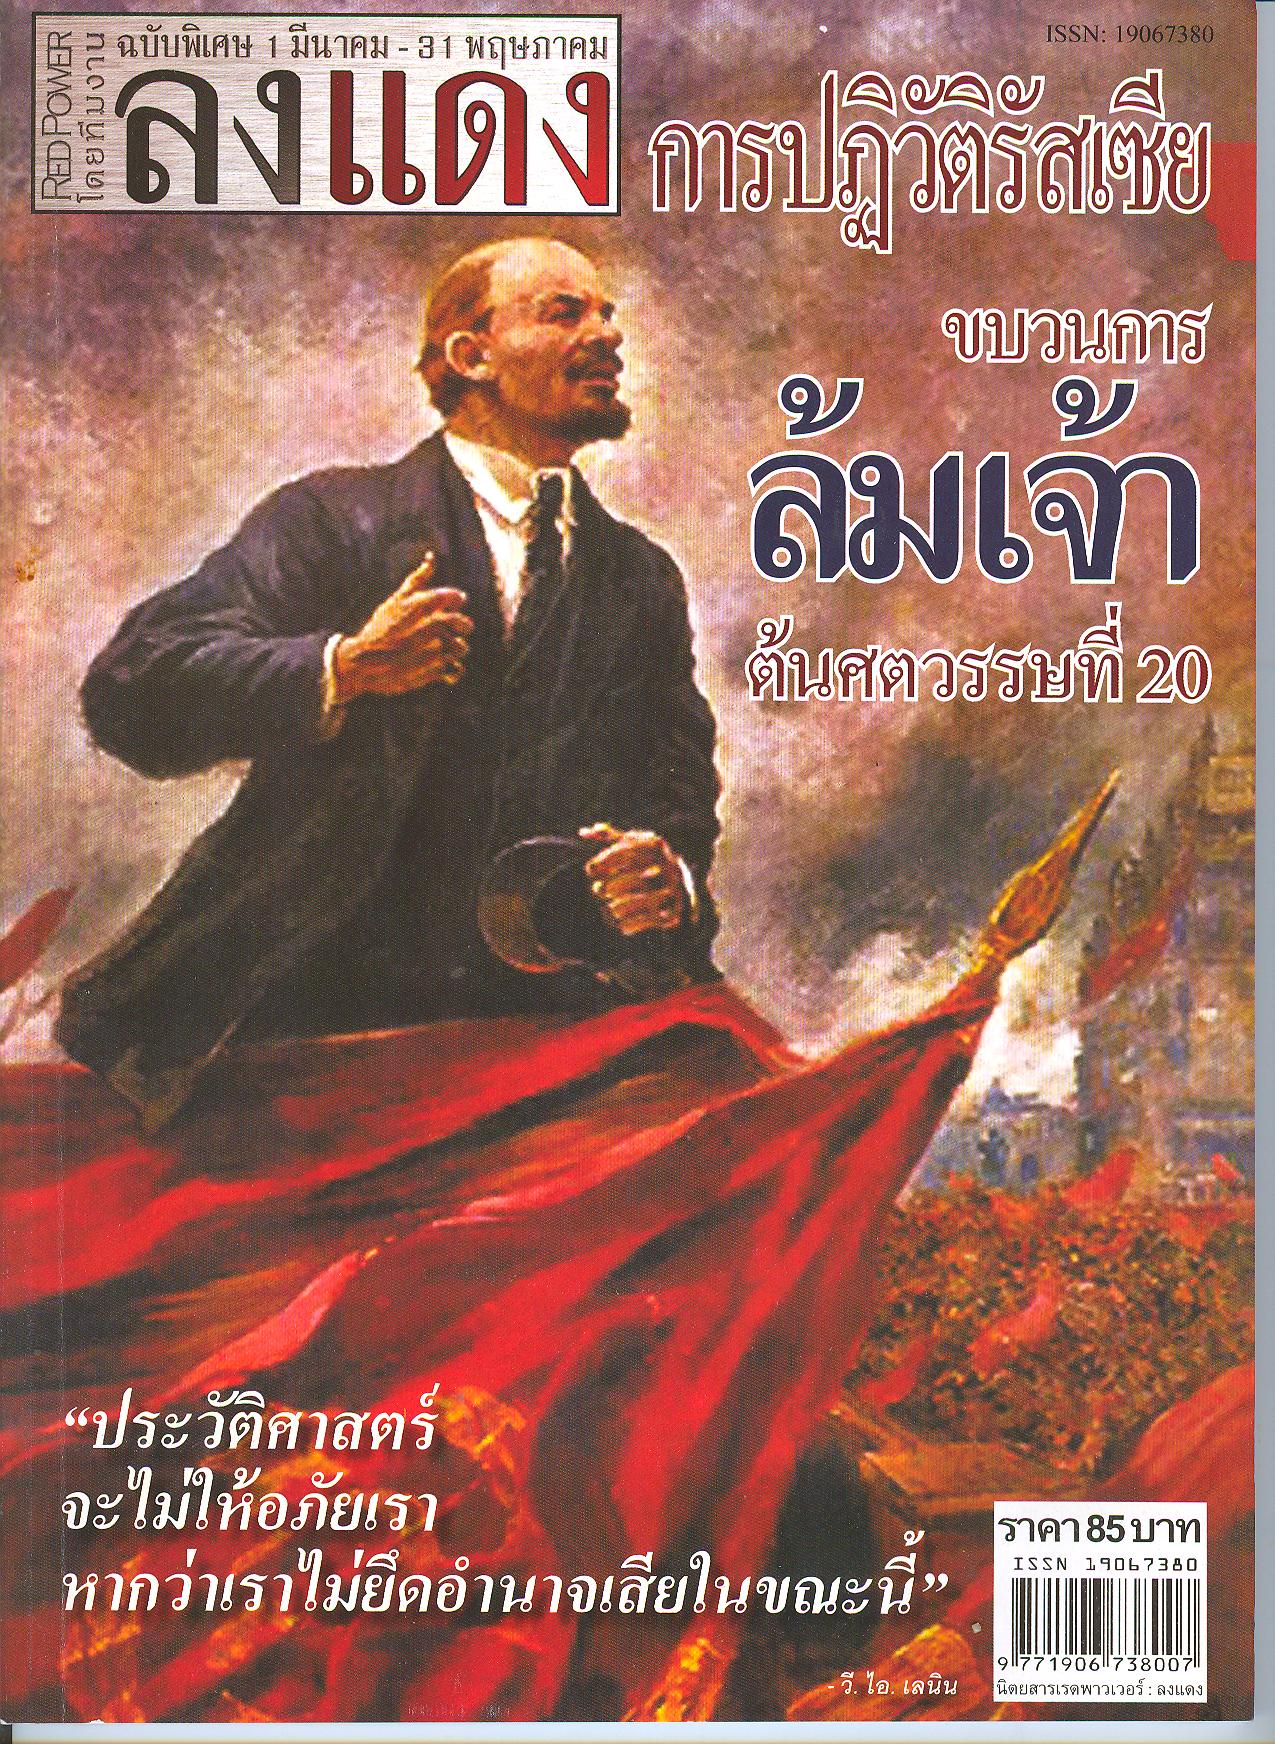 The cover of a special edition of a Special Edition magazine sold at red shirt protests, explicitly drawing parallels between the Russian Revolution and the political situation in 2010. The quoted text on the front is a Thai translation of Lenin’s famous statement: “History will not forgive us if we do not assume power now.”